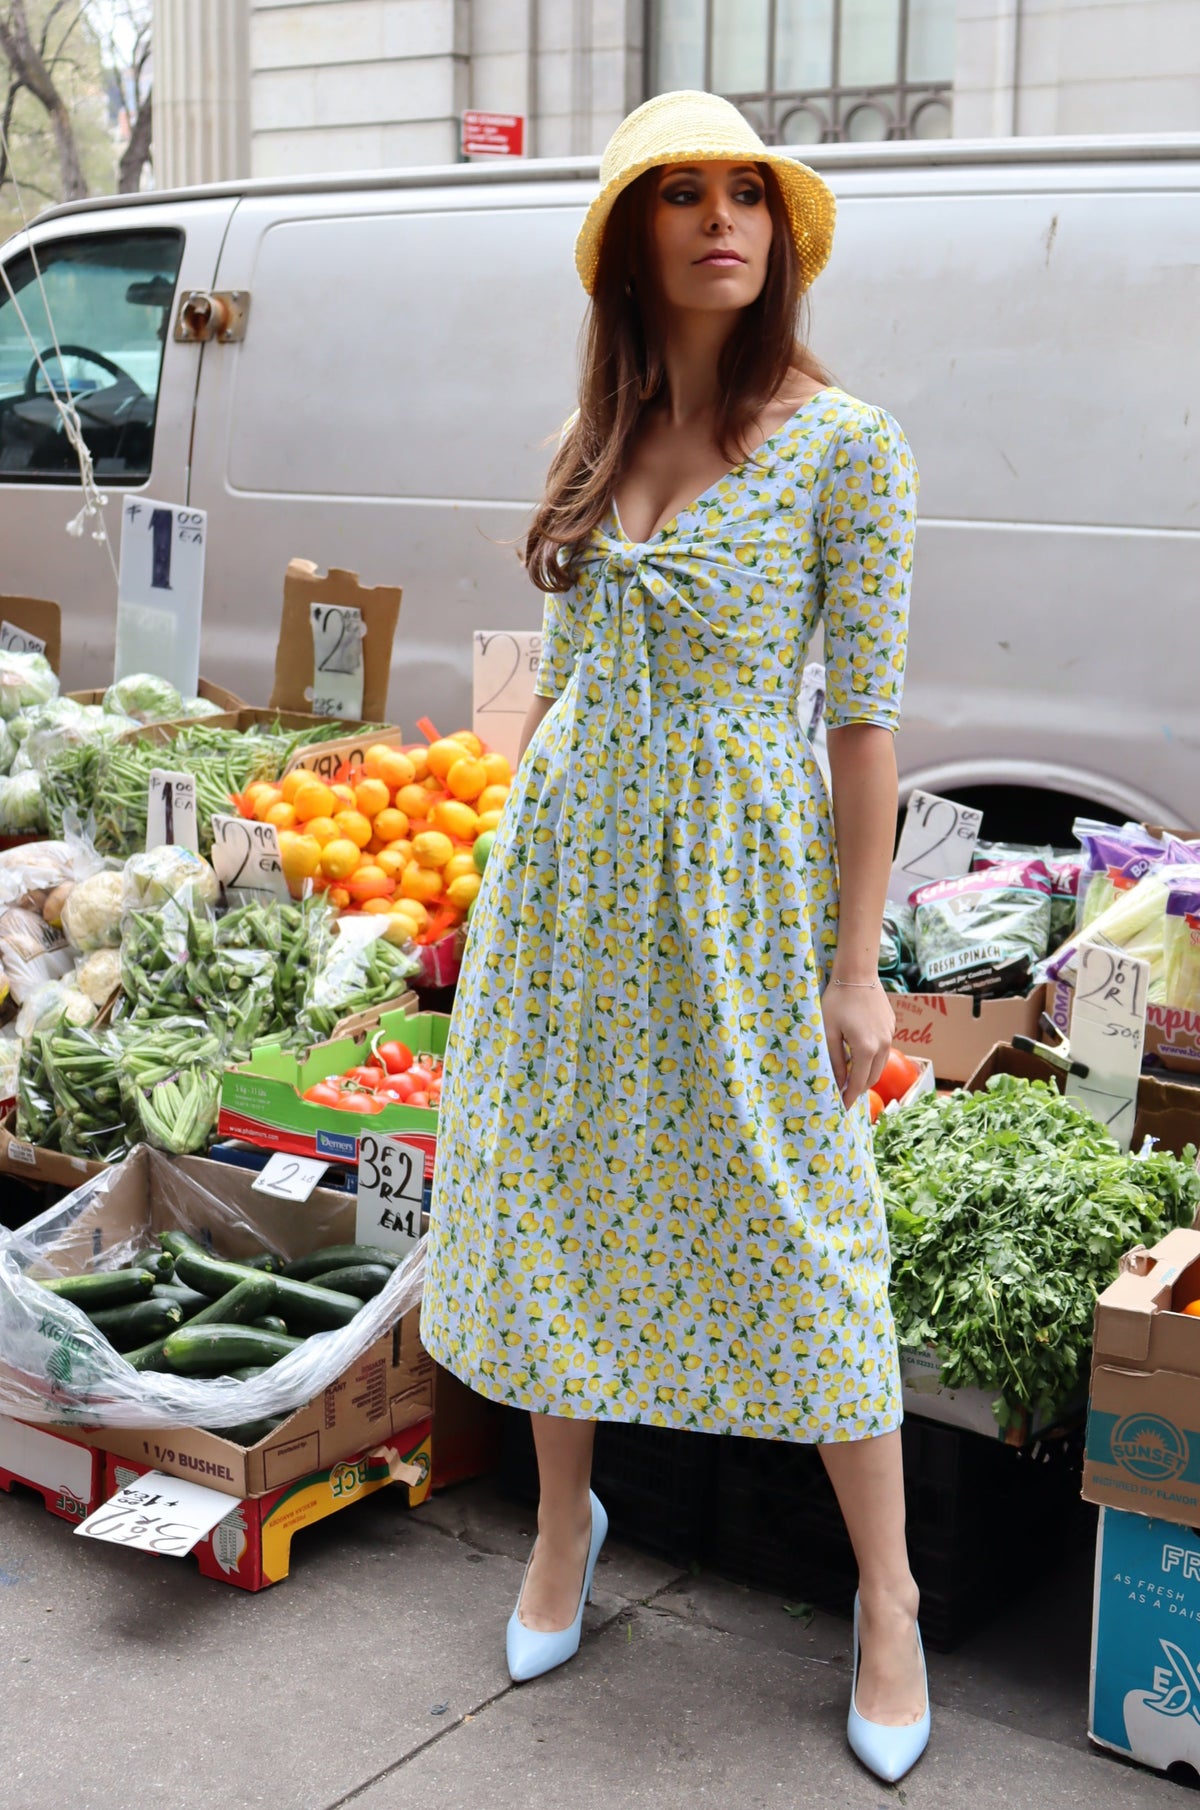 Model wearing a tan bucket hat and a midi dress in a lemon print of aqua blue and  yellow in front of a fruit display at a farmer's market.